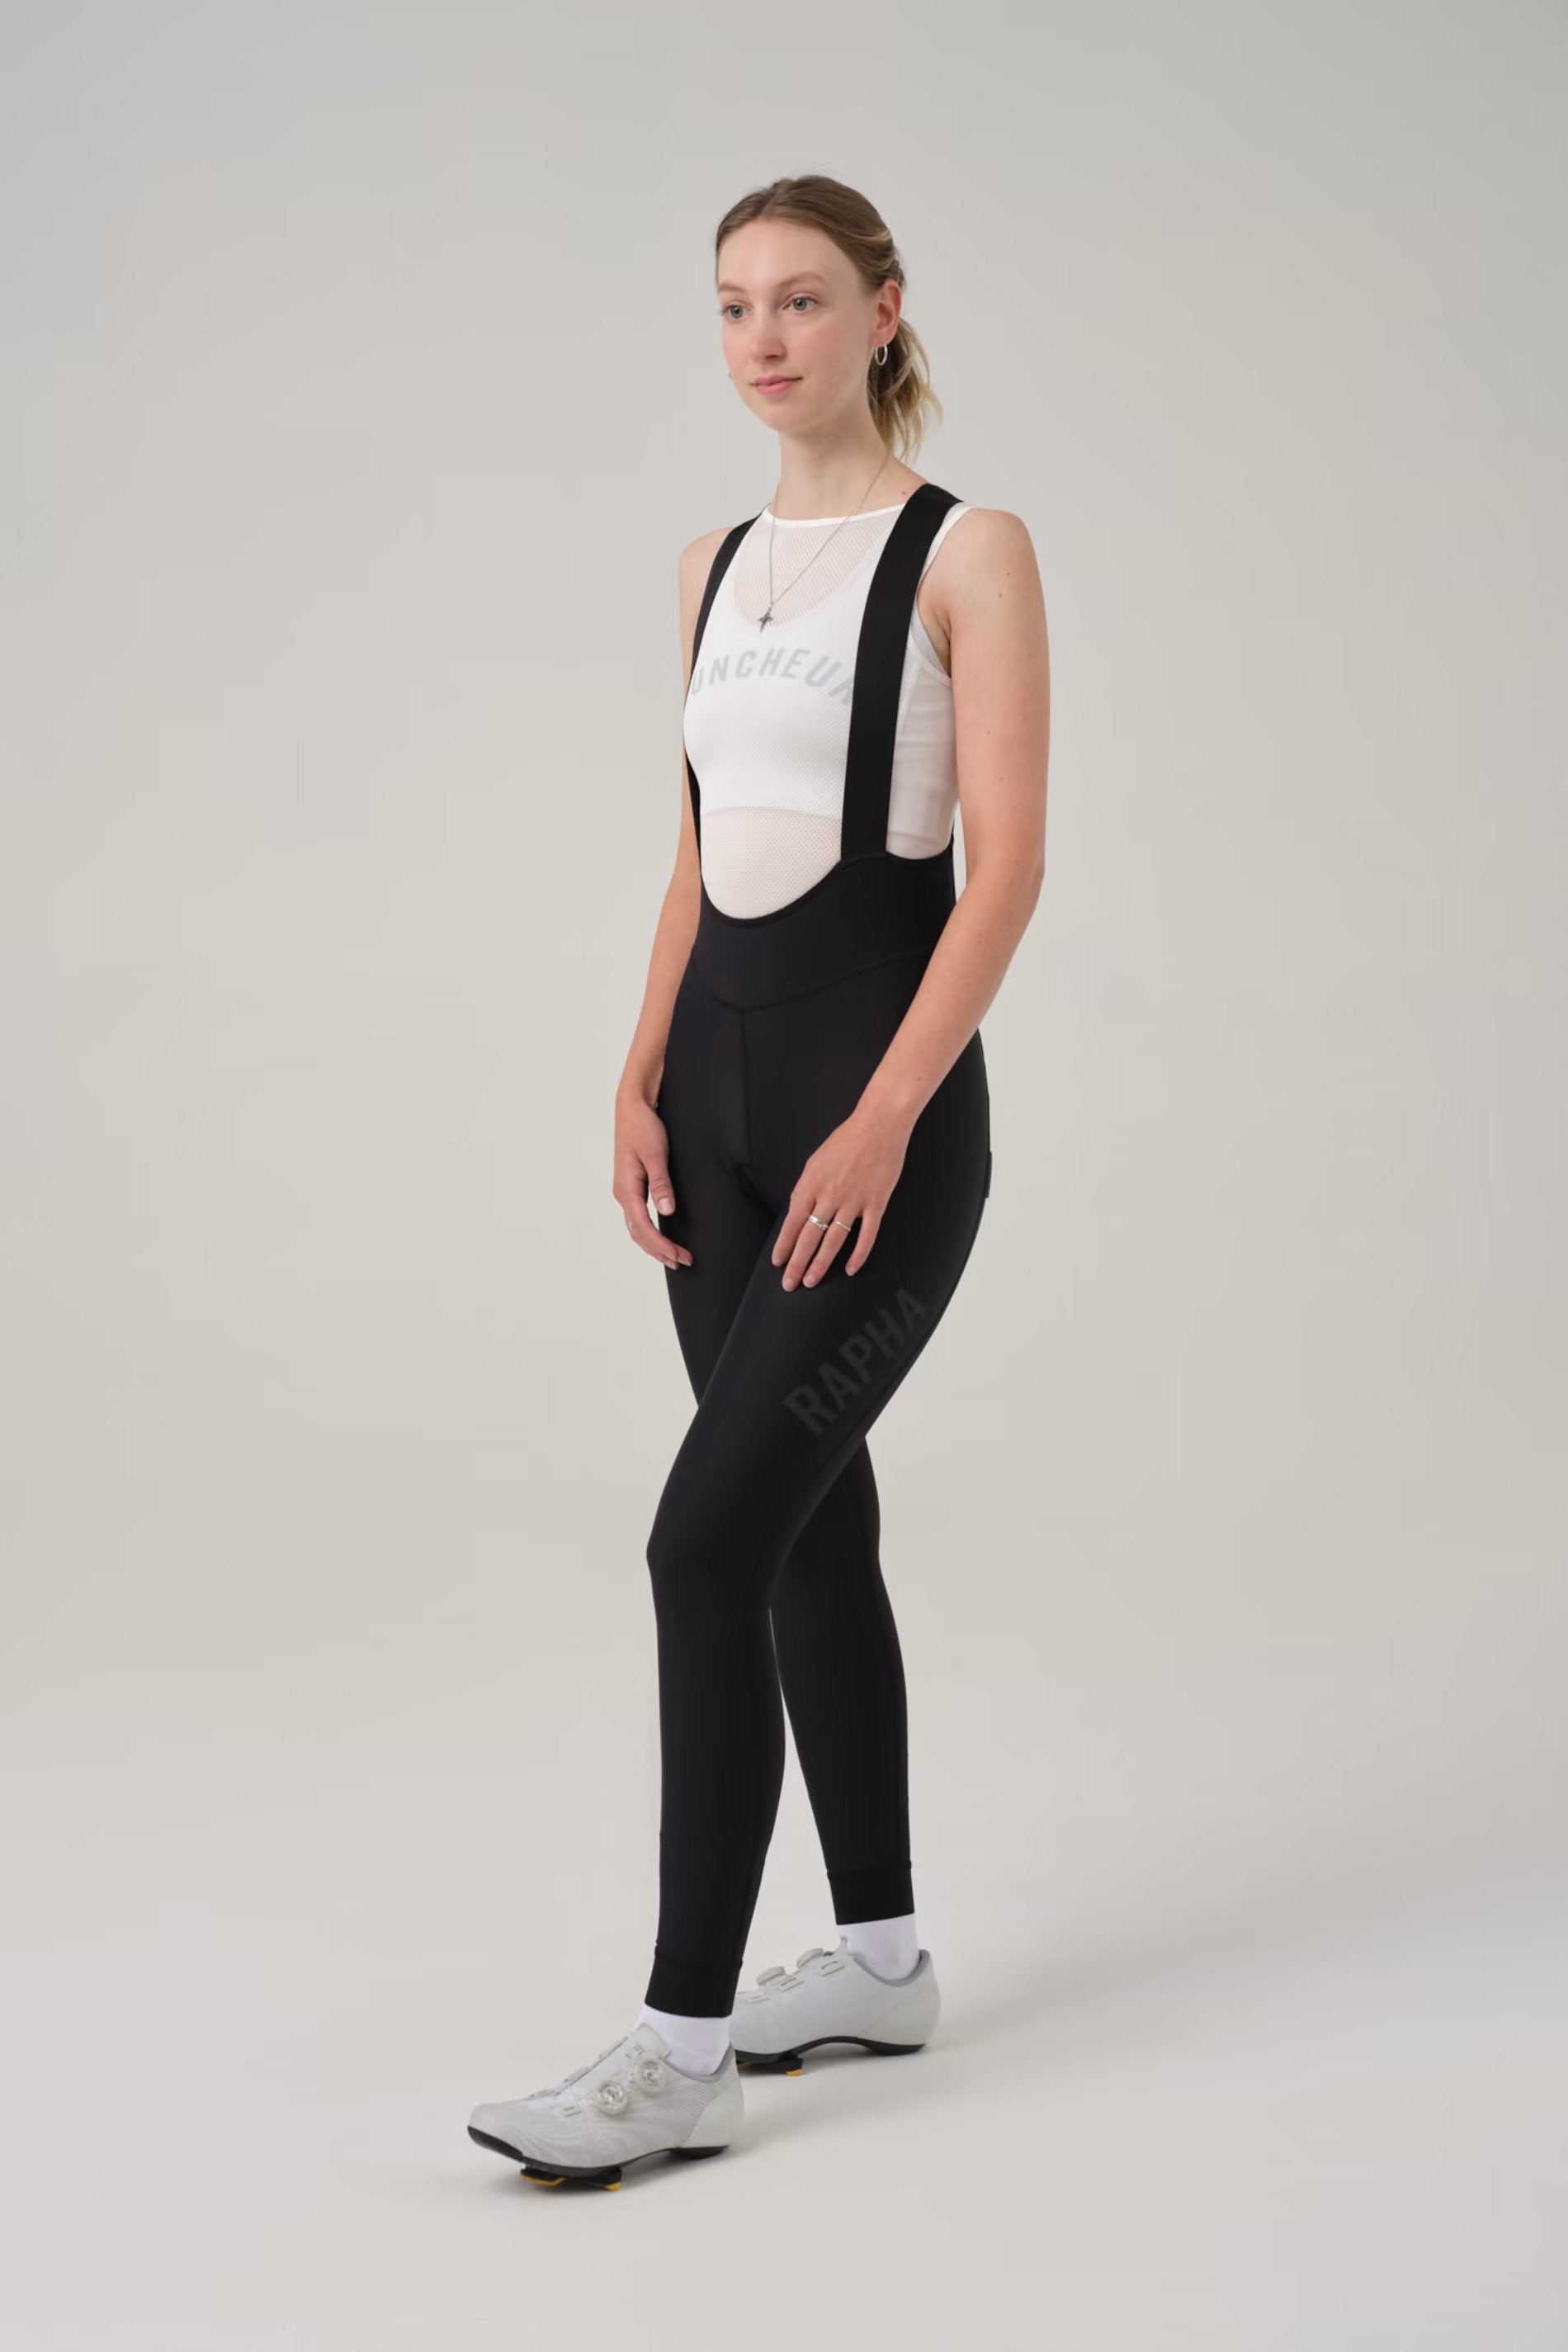 Rapha - Women's Pro Team Training Tights With Pad Grid